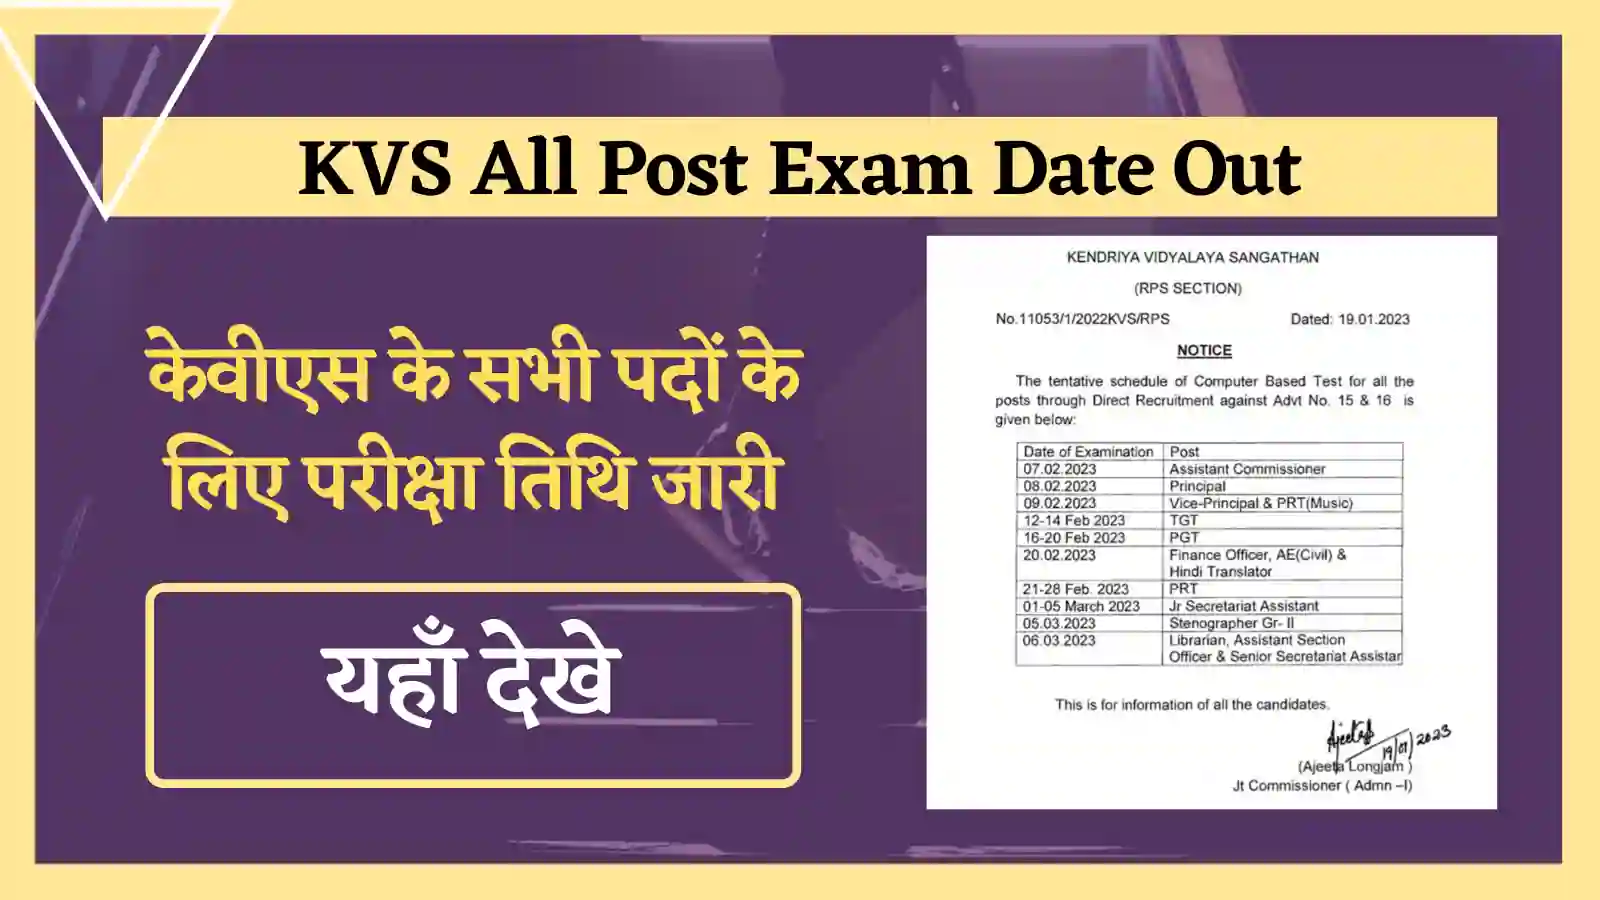 KVS All Post Exam Date Out